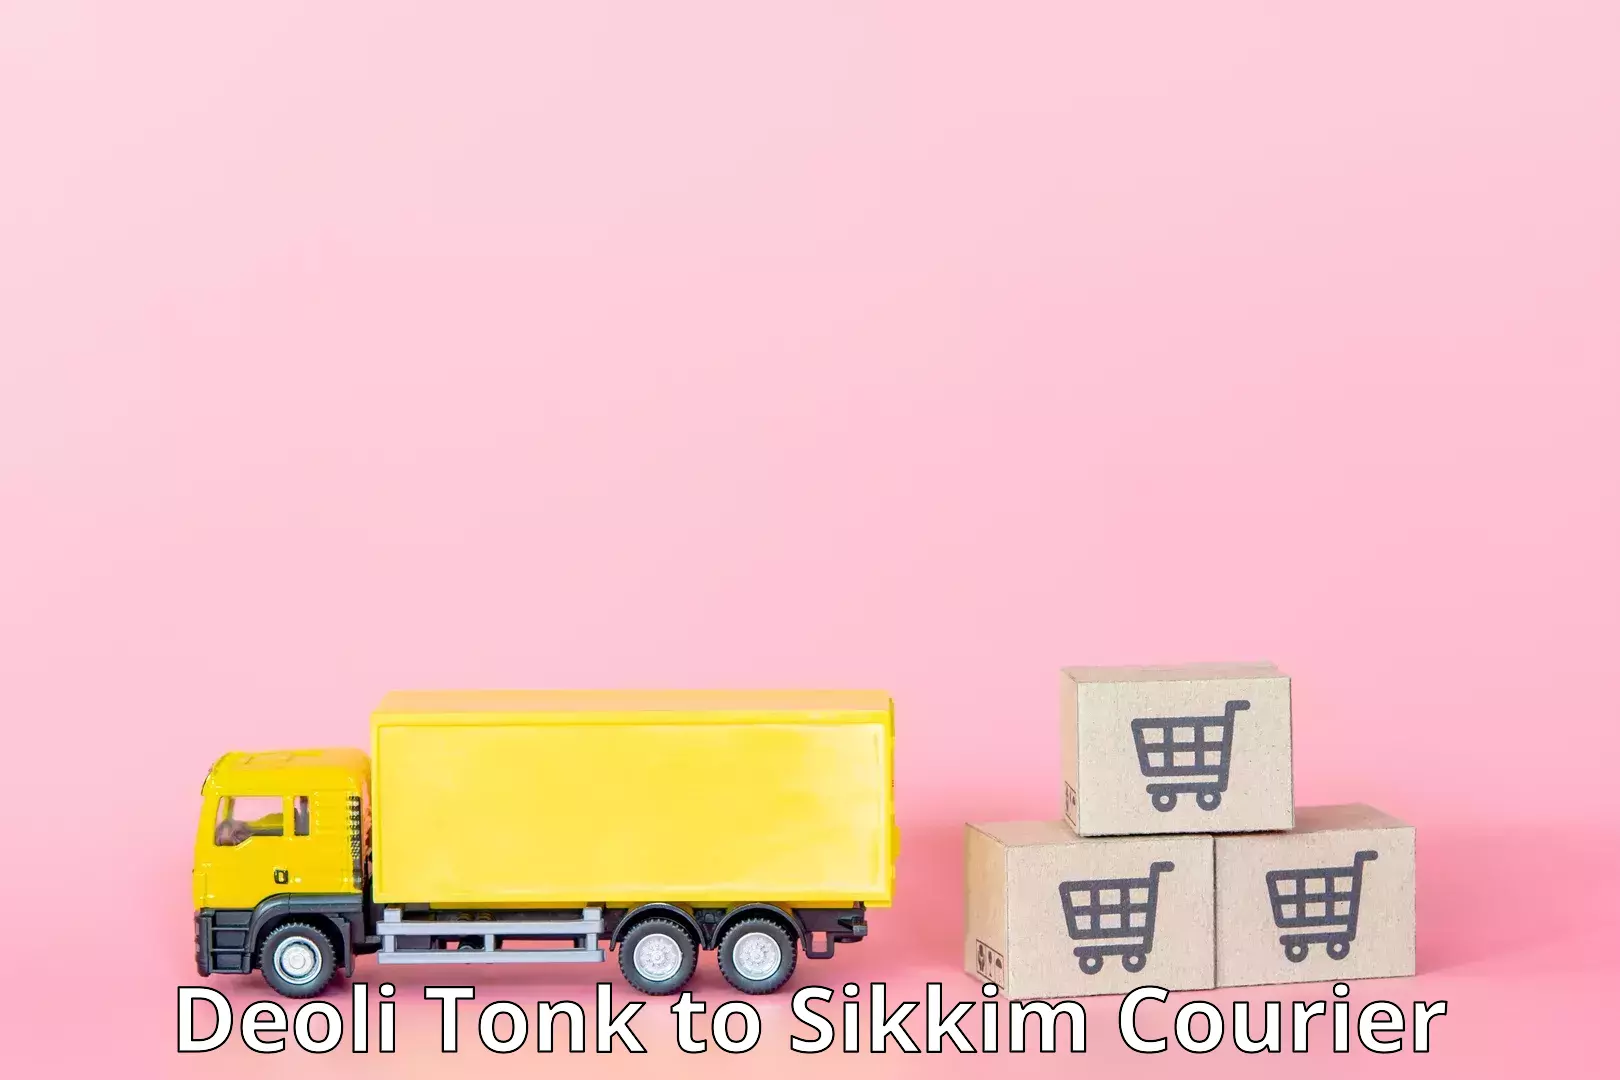 Full-service courier options Deoli Tonk to Sikkim